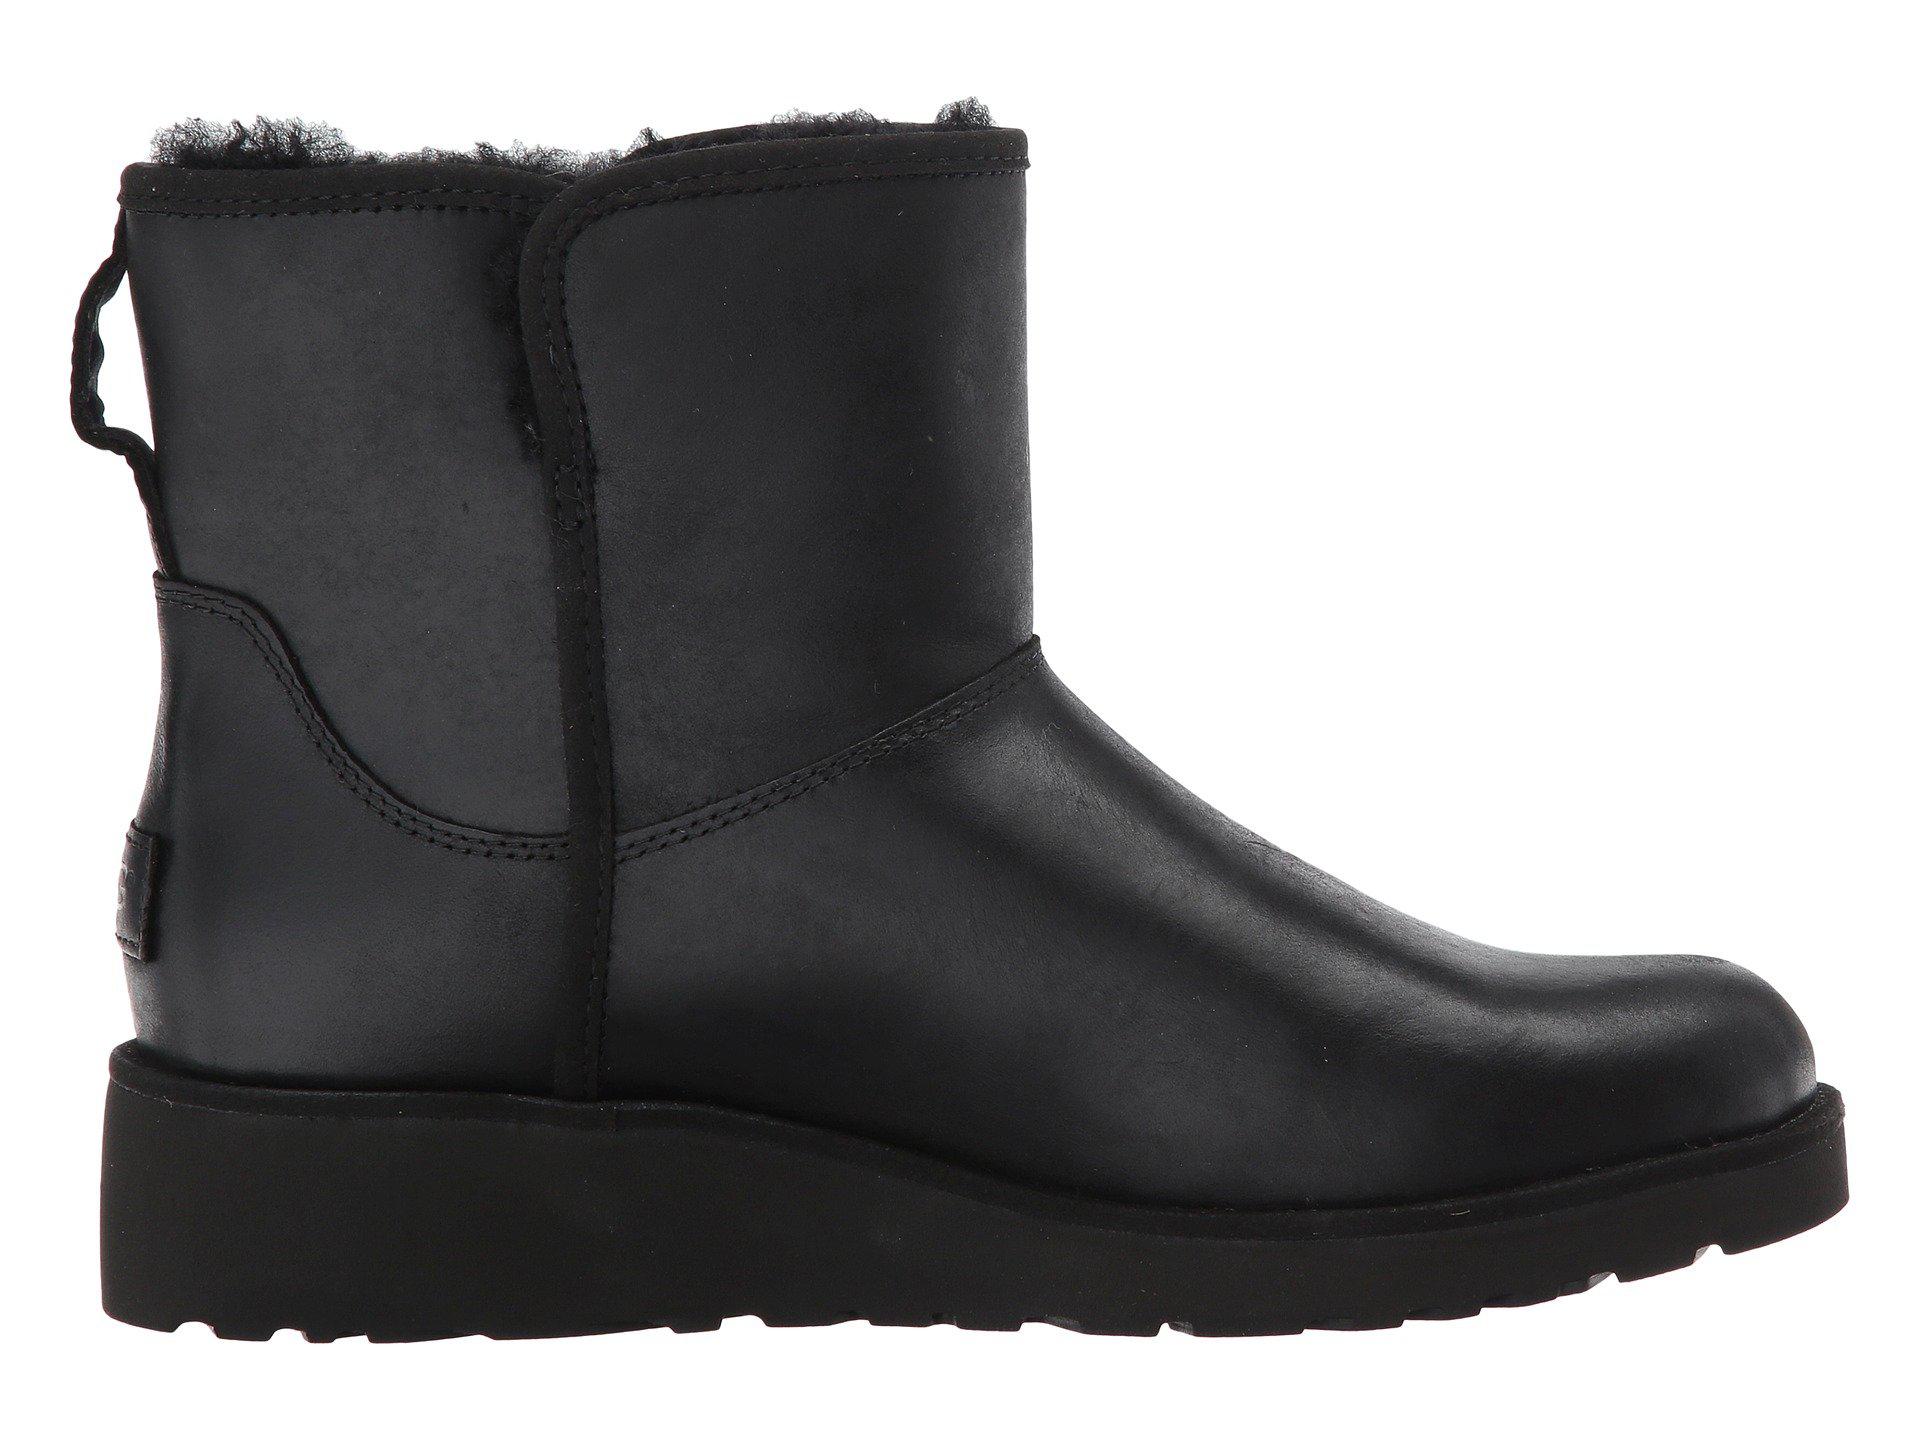 ugg kristin leather black for Sale,Up To OFF 65%